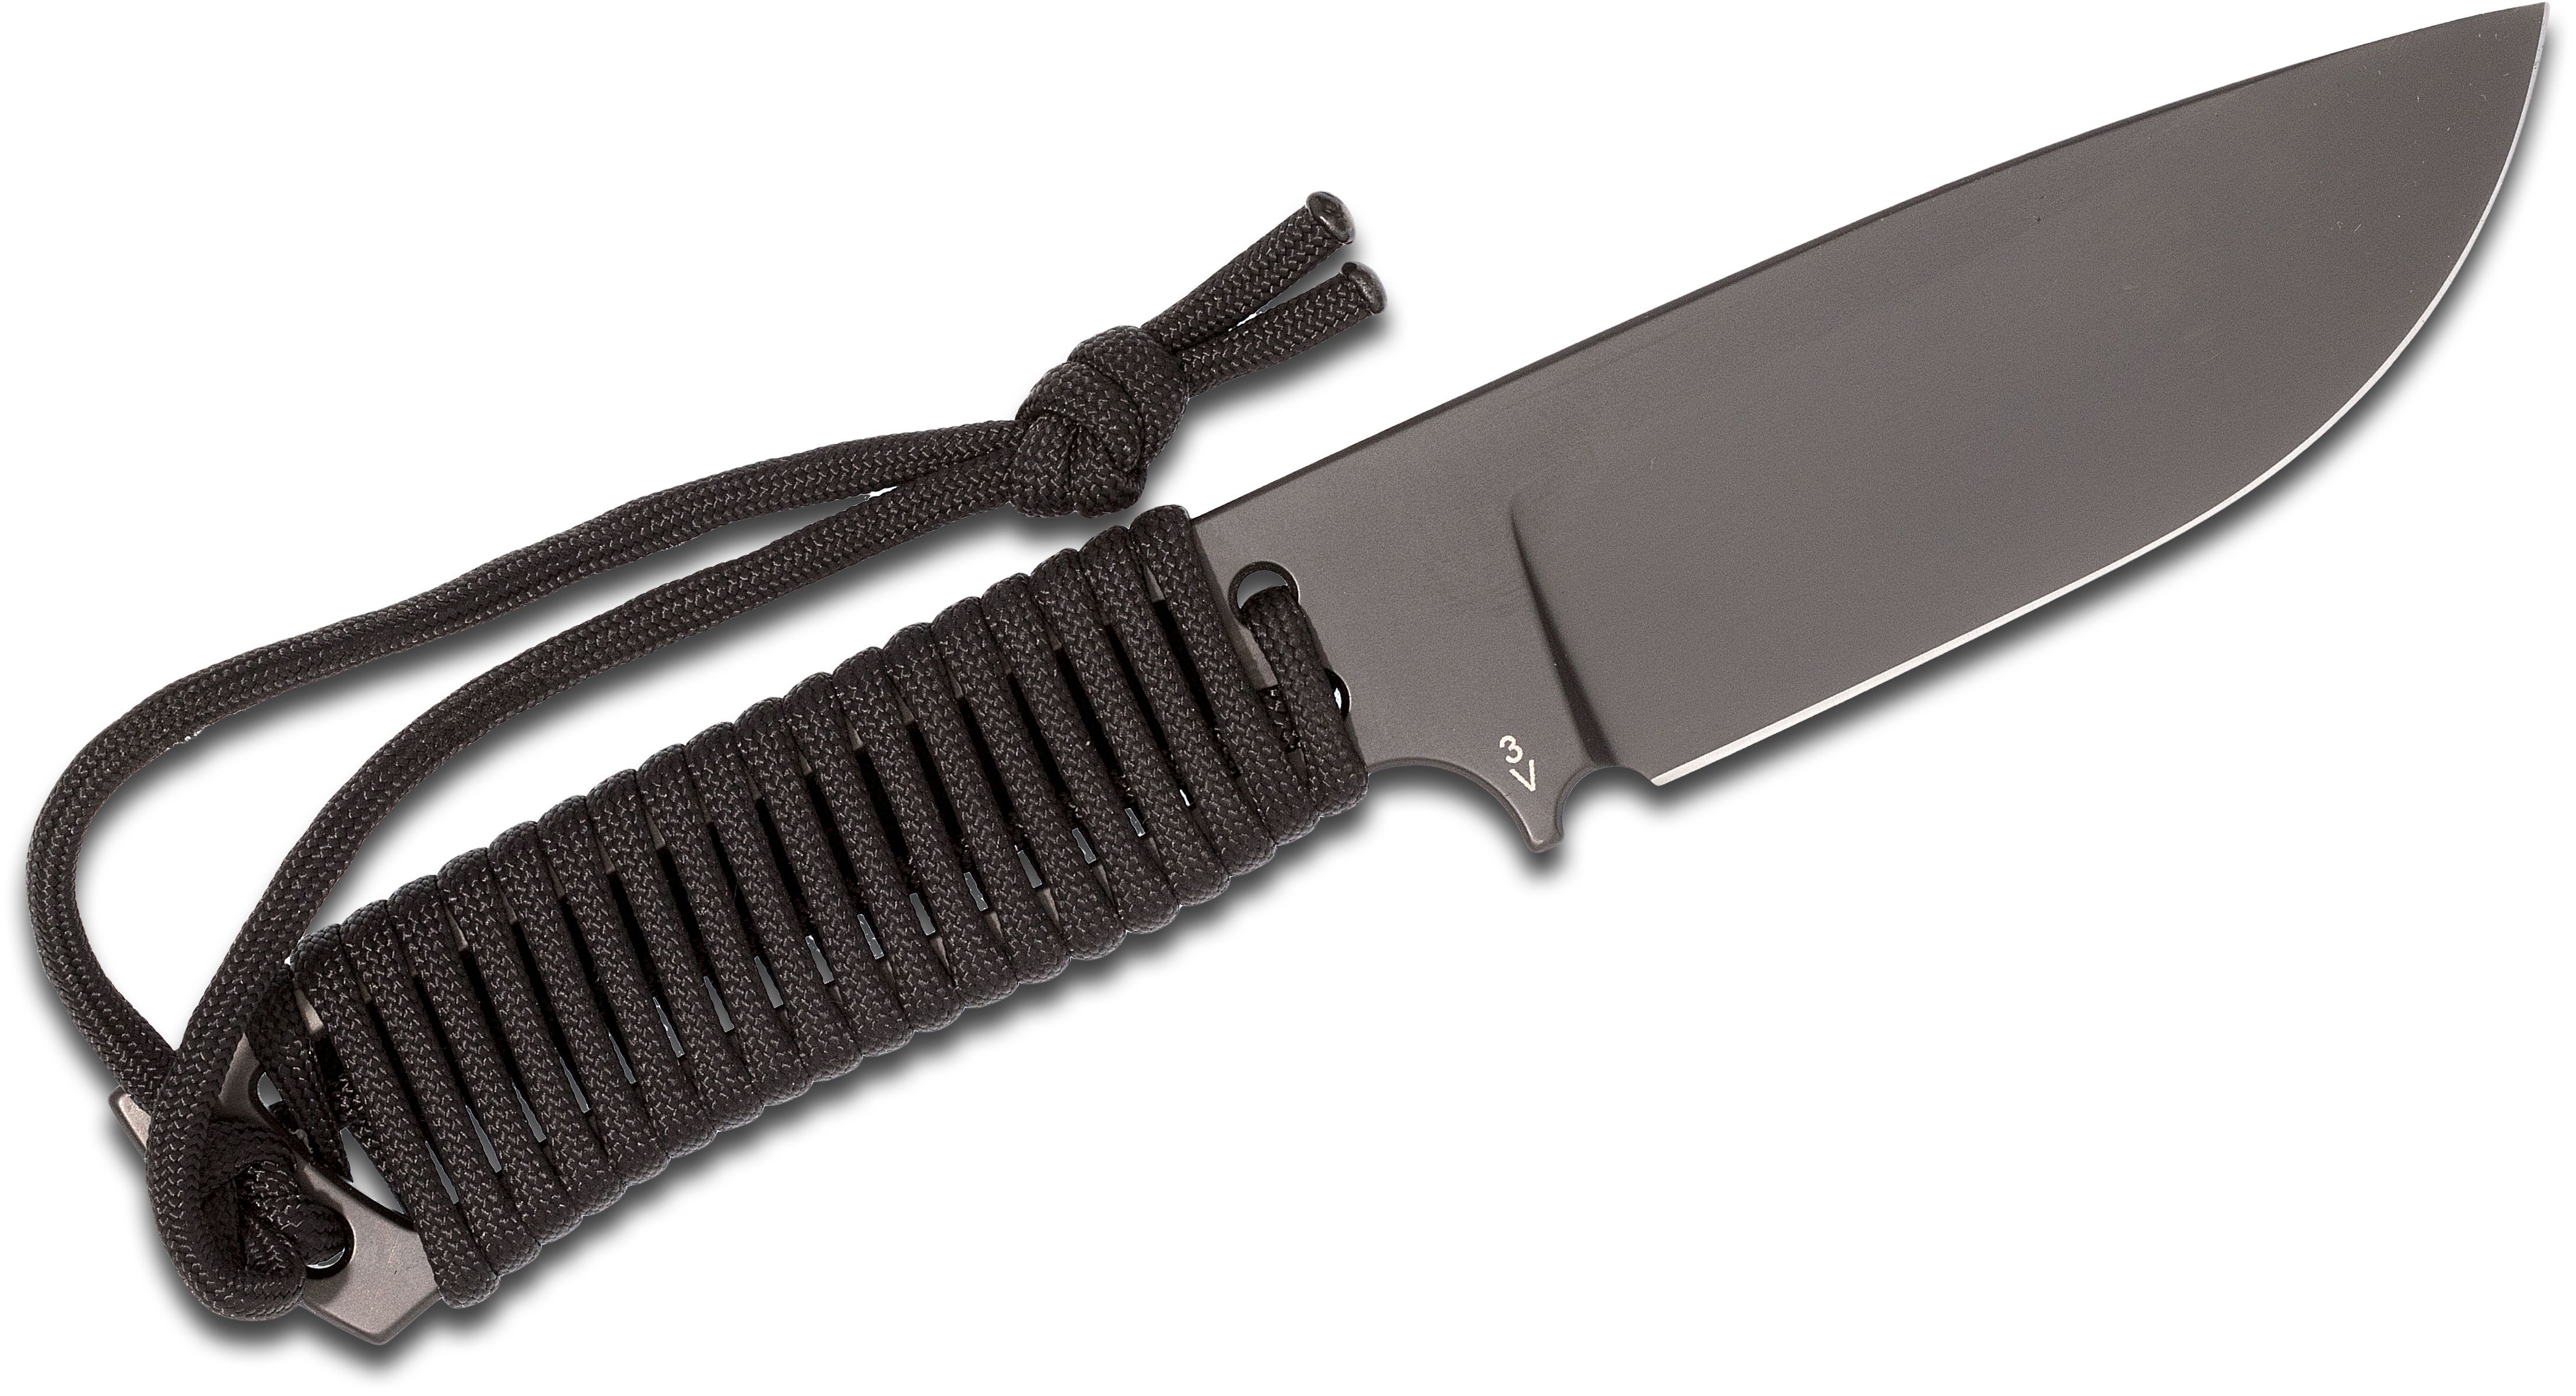 Chaves American Made Redemption 2 Fixed 3 5 Cpm 3v Black Dlc Drop Point Blade Black Paracord Handle Kydex Sheath Knifecenter Discontinued